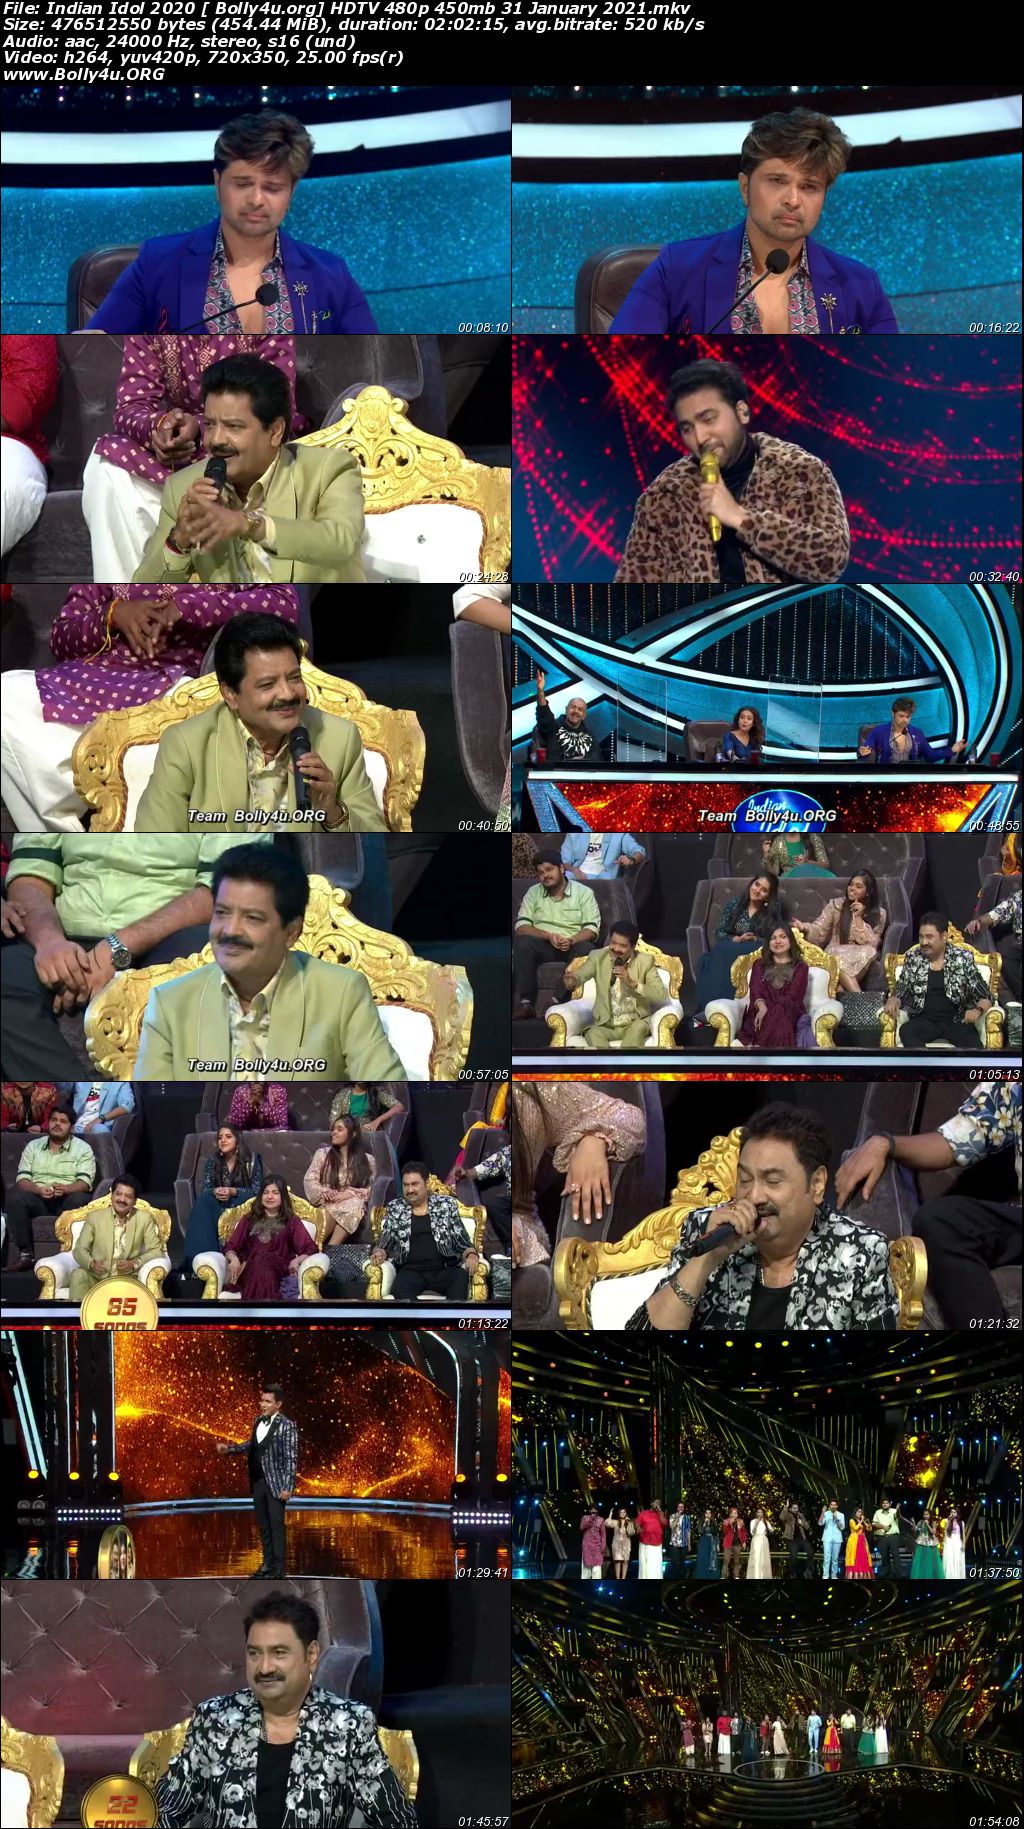 Indian Idol 2021 HDTV 480p 450mb 31 January 2021 Download